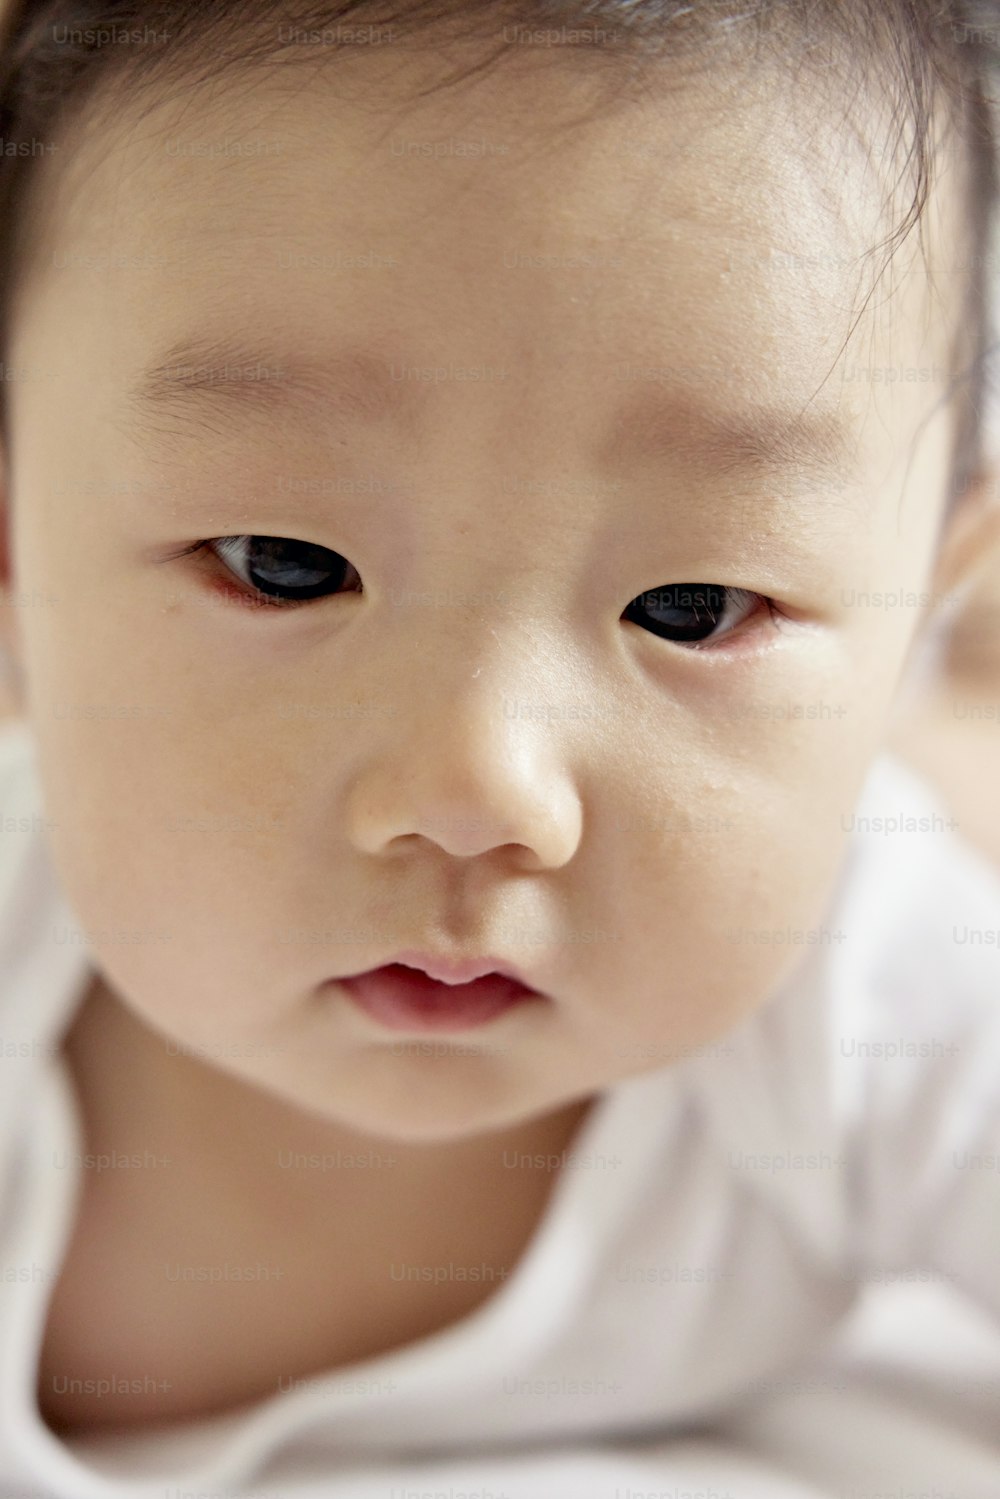 a close up of a baby wearing a white shirt